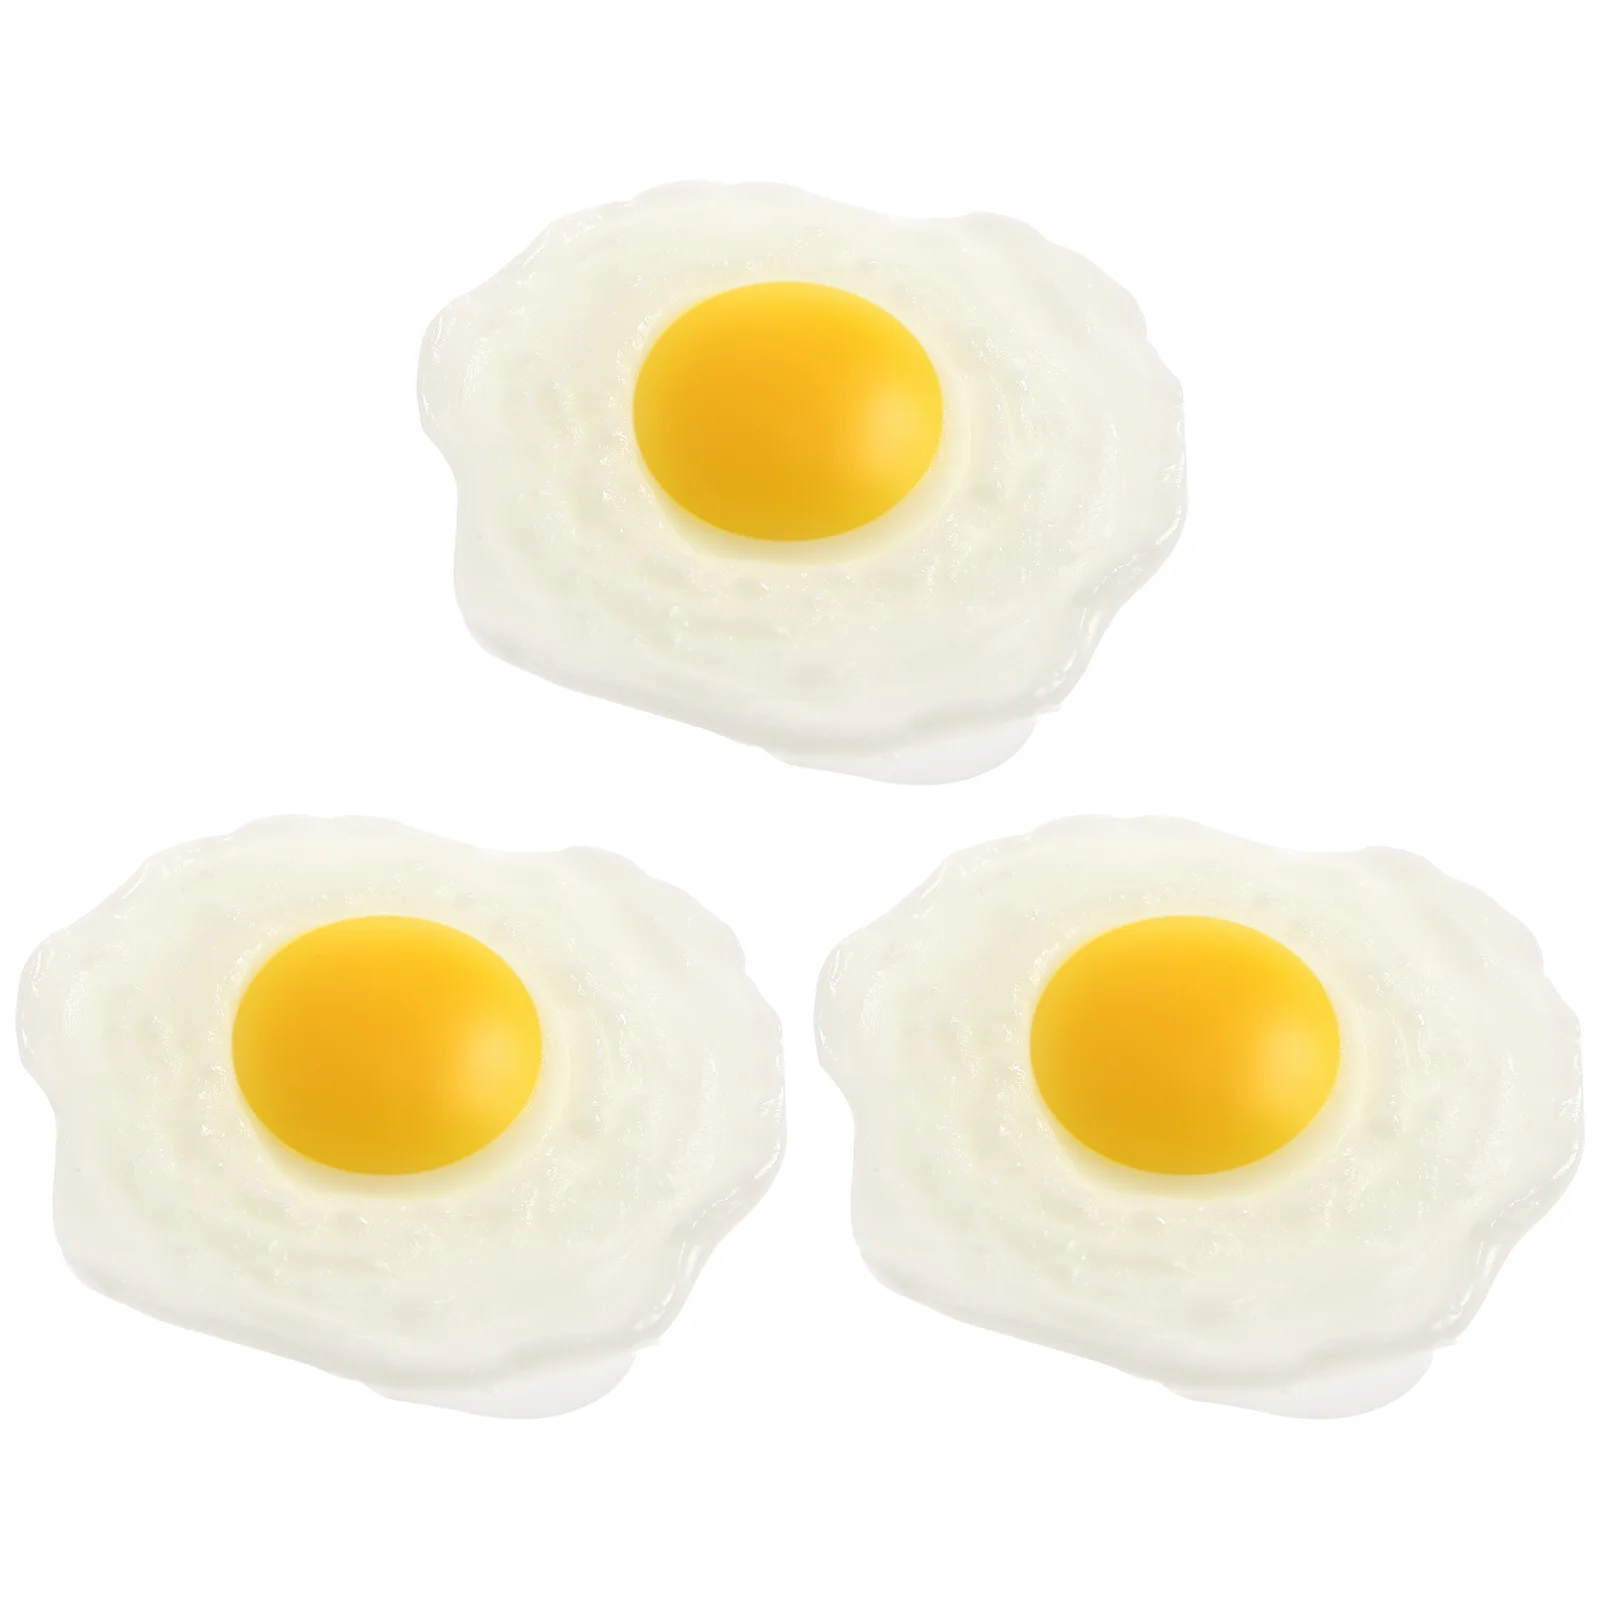 

Sticky Rubber Egg Squeeze Toys Simulation Fried Egg Stretchy Poached Egg Kids Stress Relief Toys Pretend Play Cooking Gag